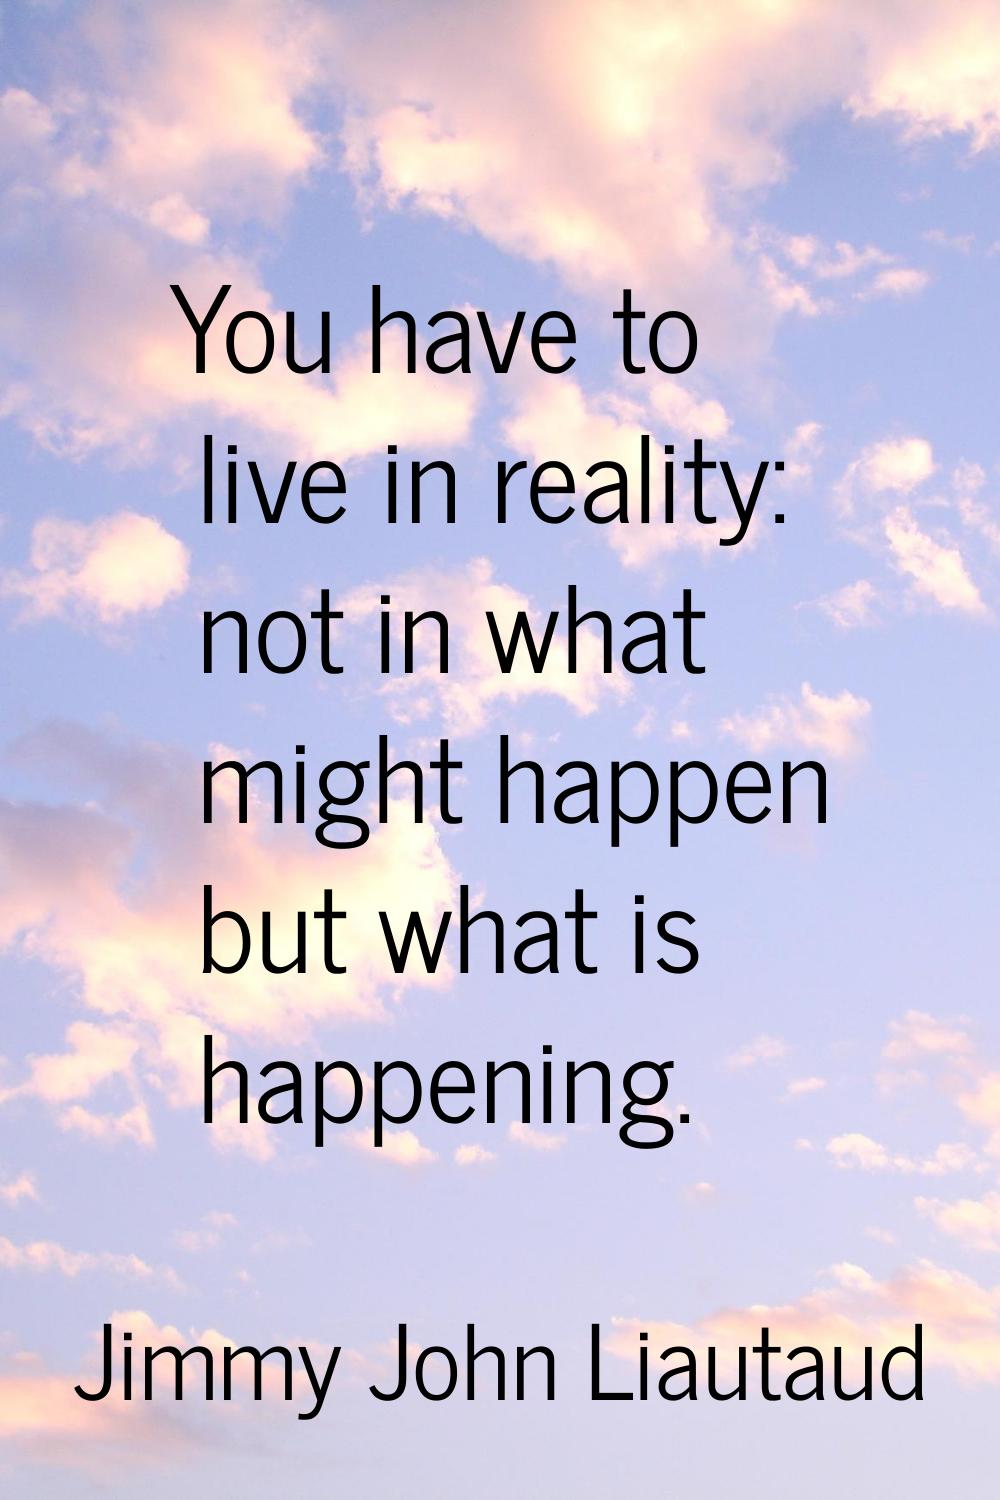 You have to live in reality: not in what might happen but what is happening.